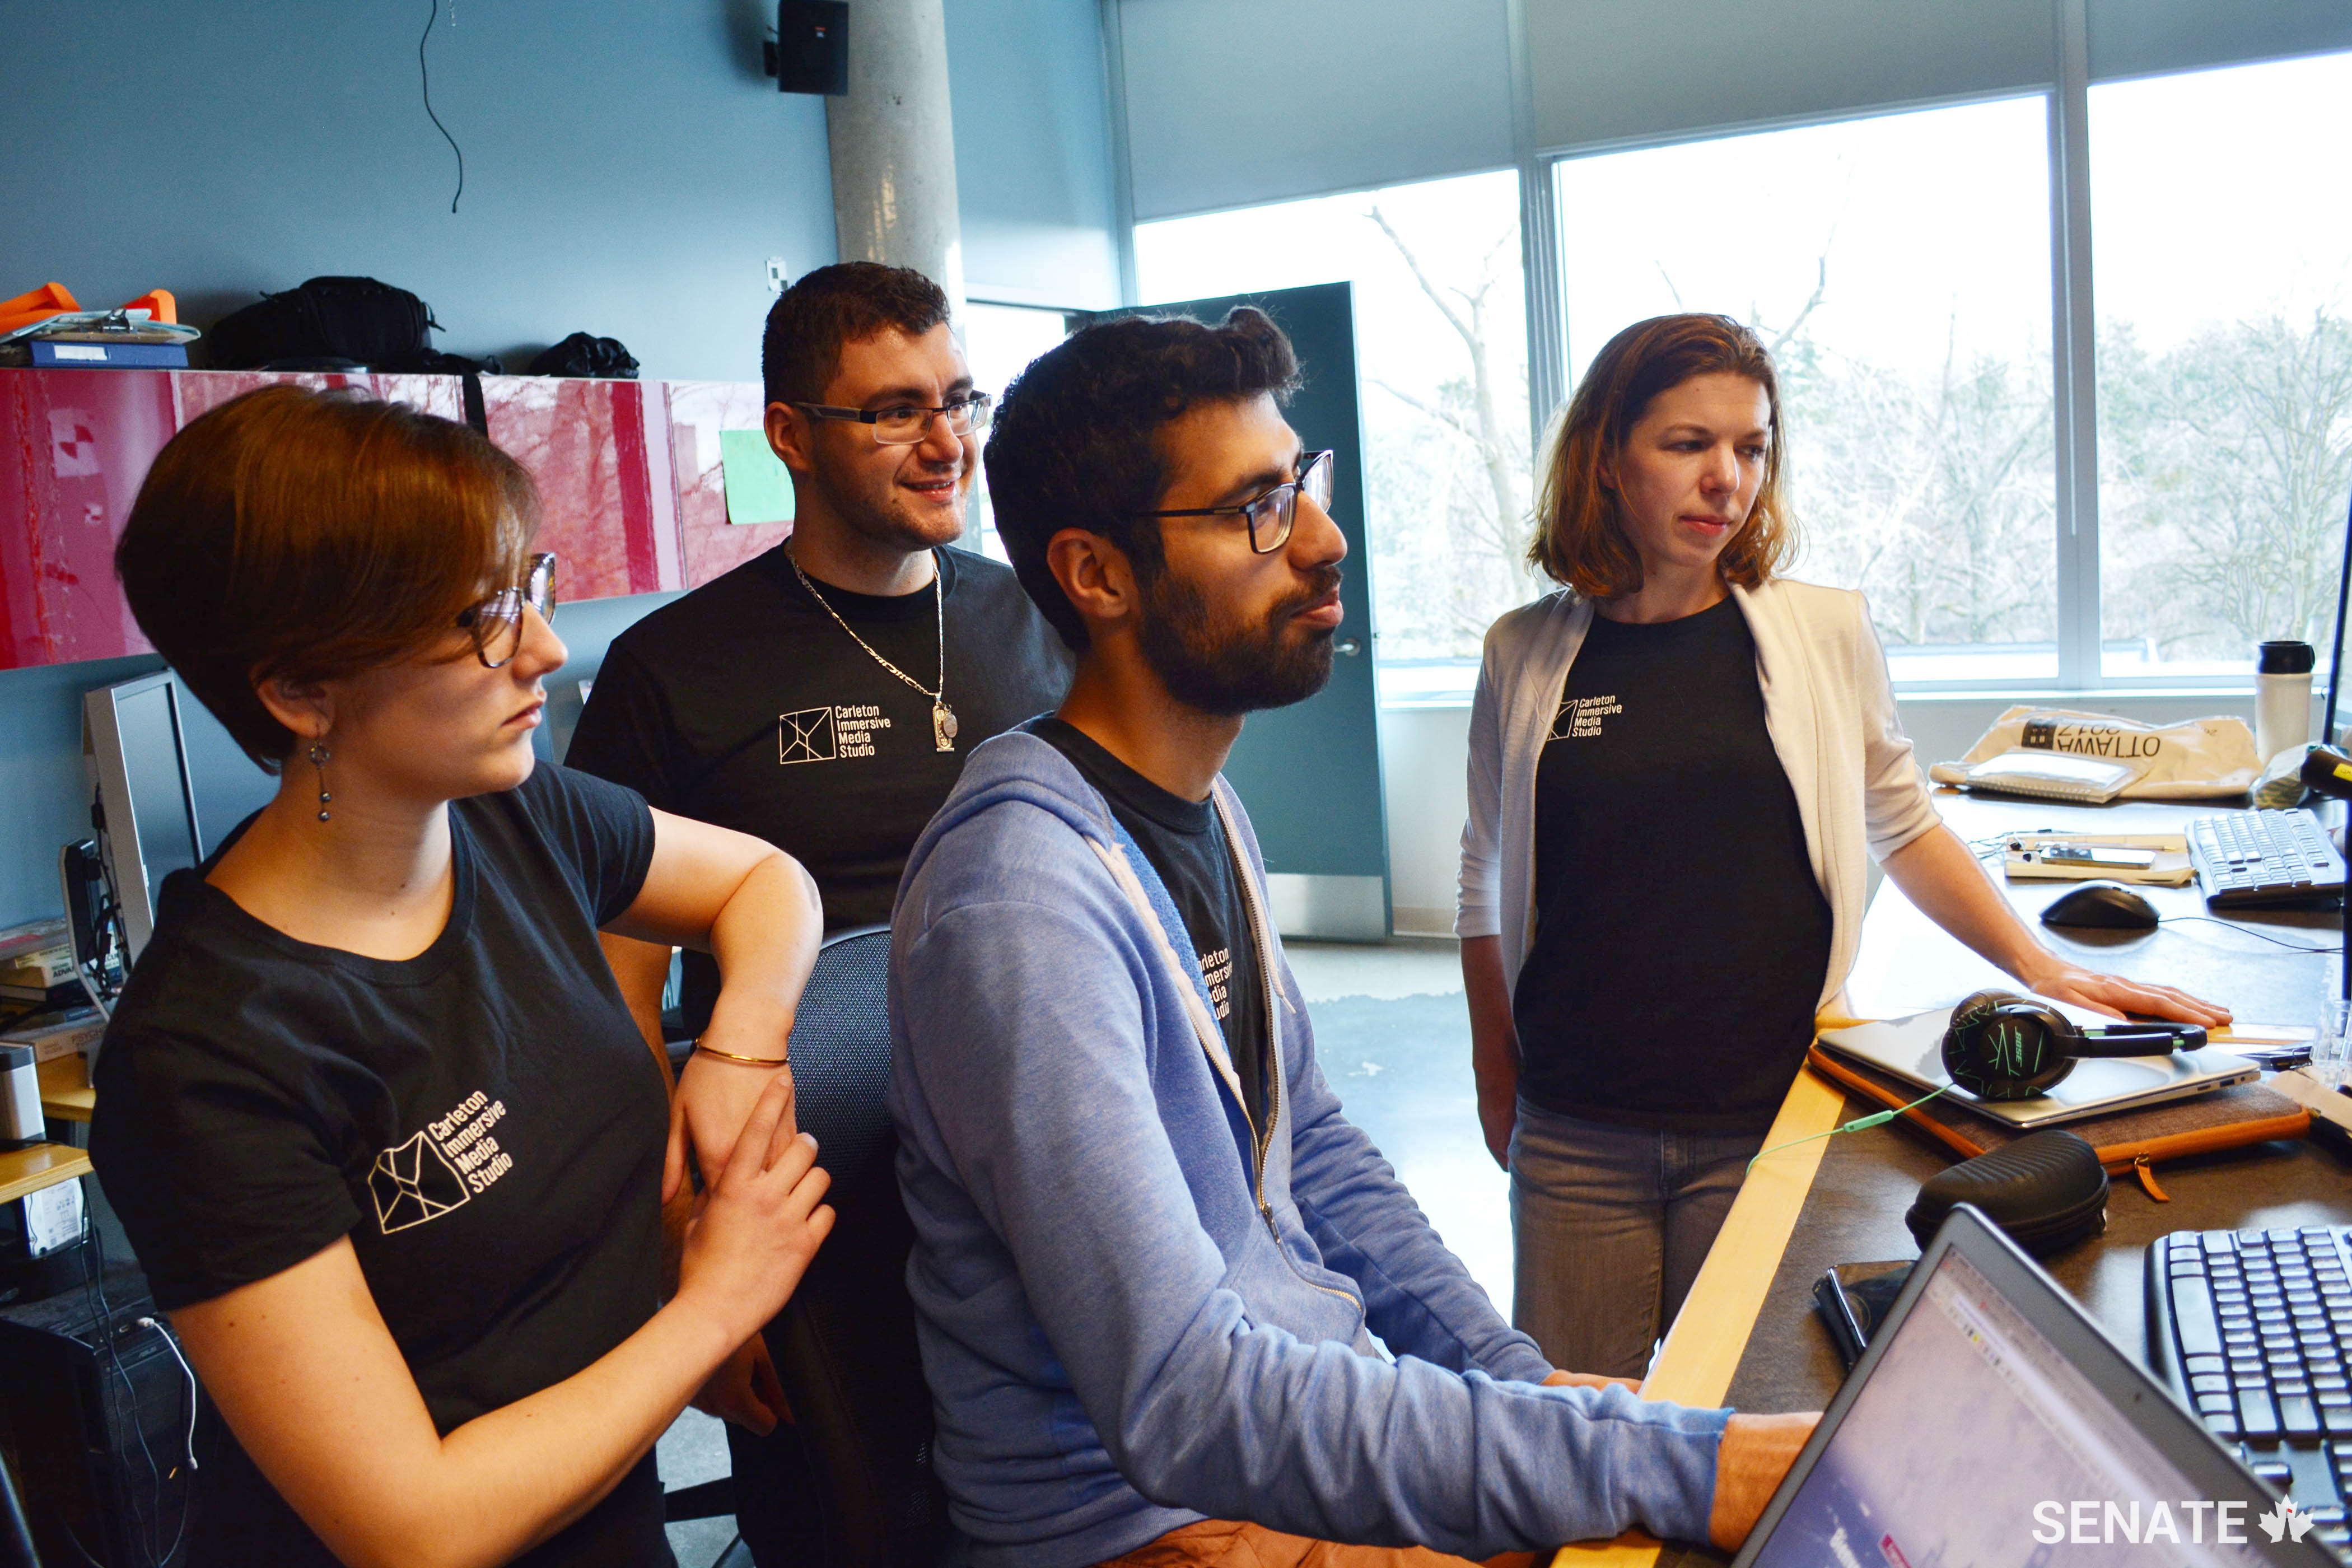 CIMS researchers (from left) Amanda Lapointe, Rufino Ansara, Abhijit Dhanda and Katie Graham evaluate the Senate Virtual Tour as the project nears completion.